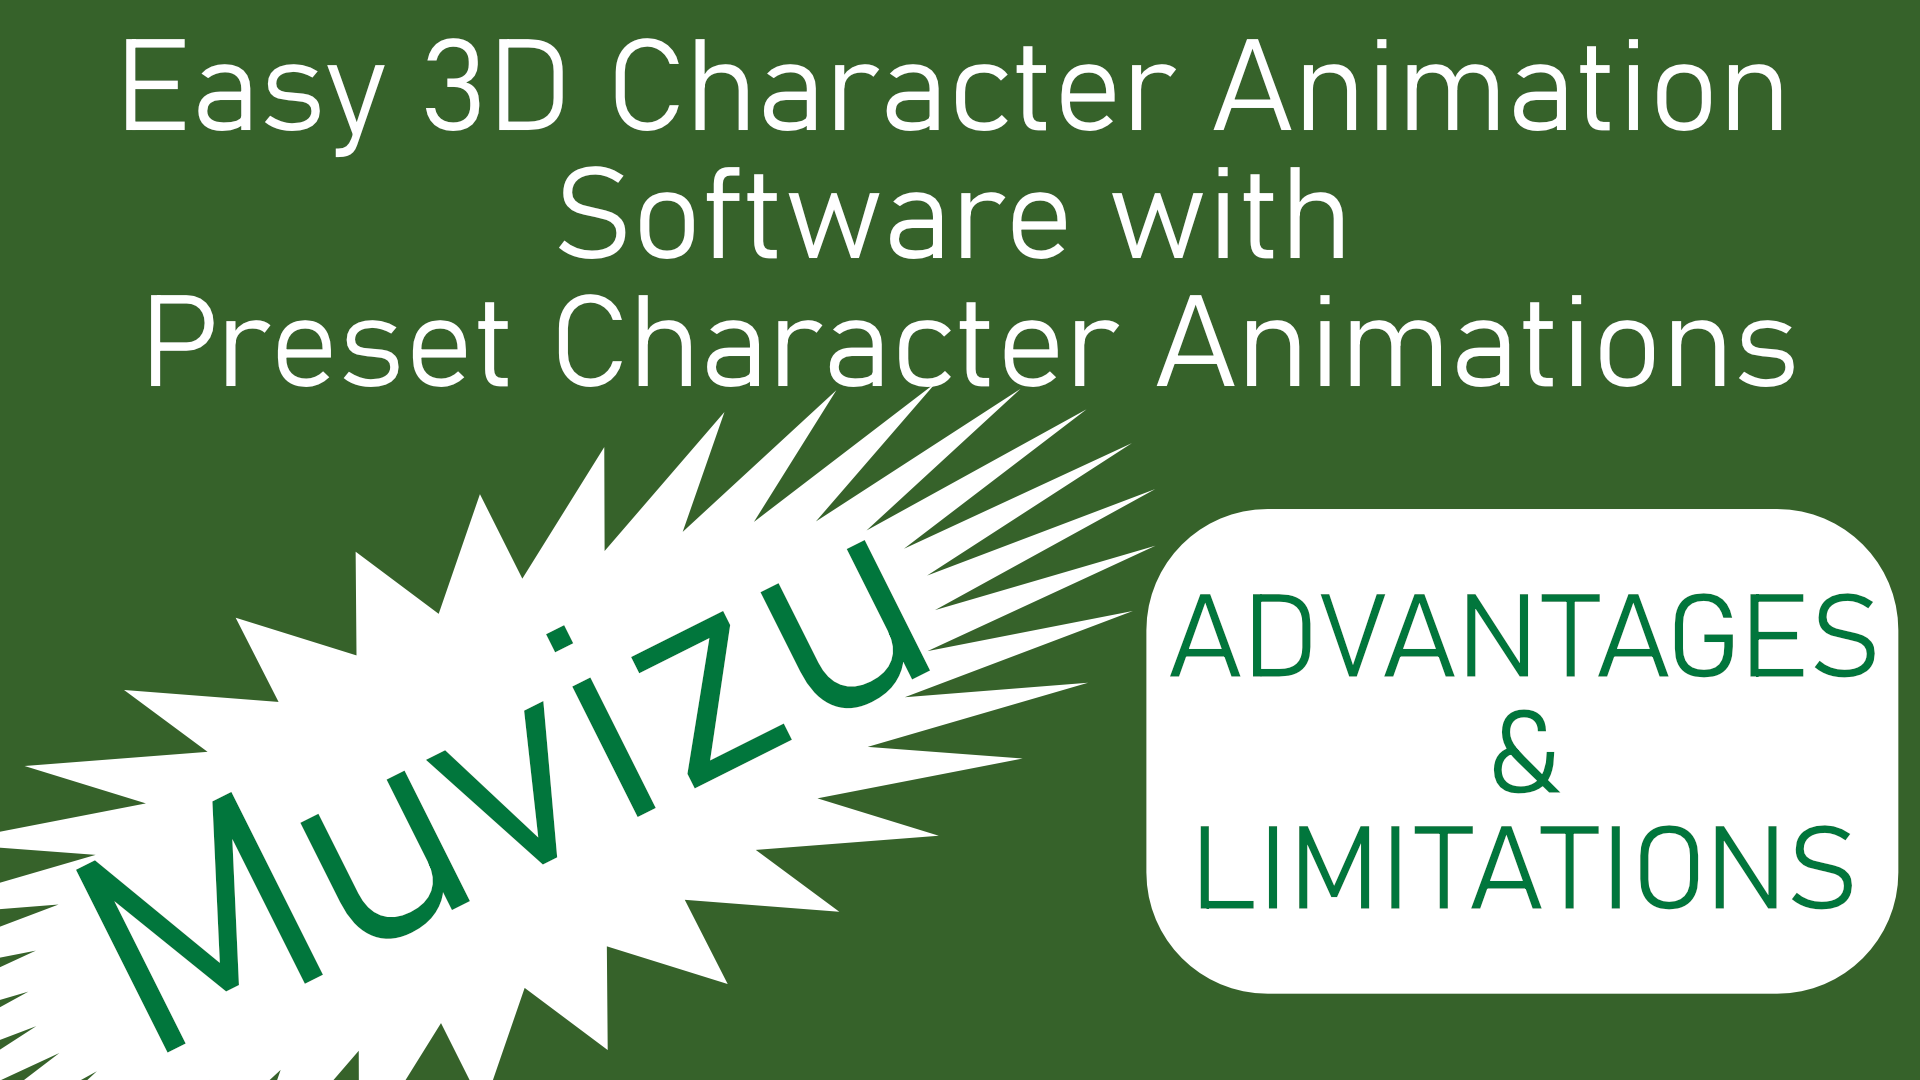 Easy 3D Character Animation Software: Muvizu [Preset Animations] -  